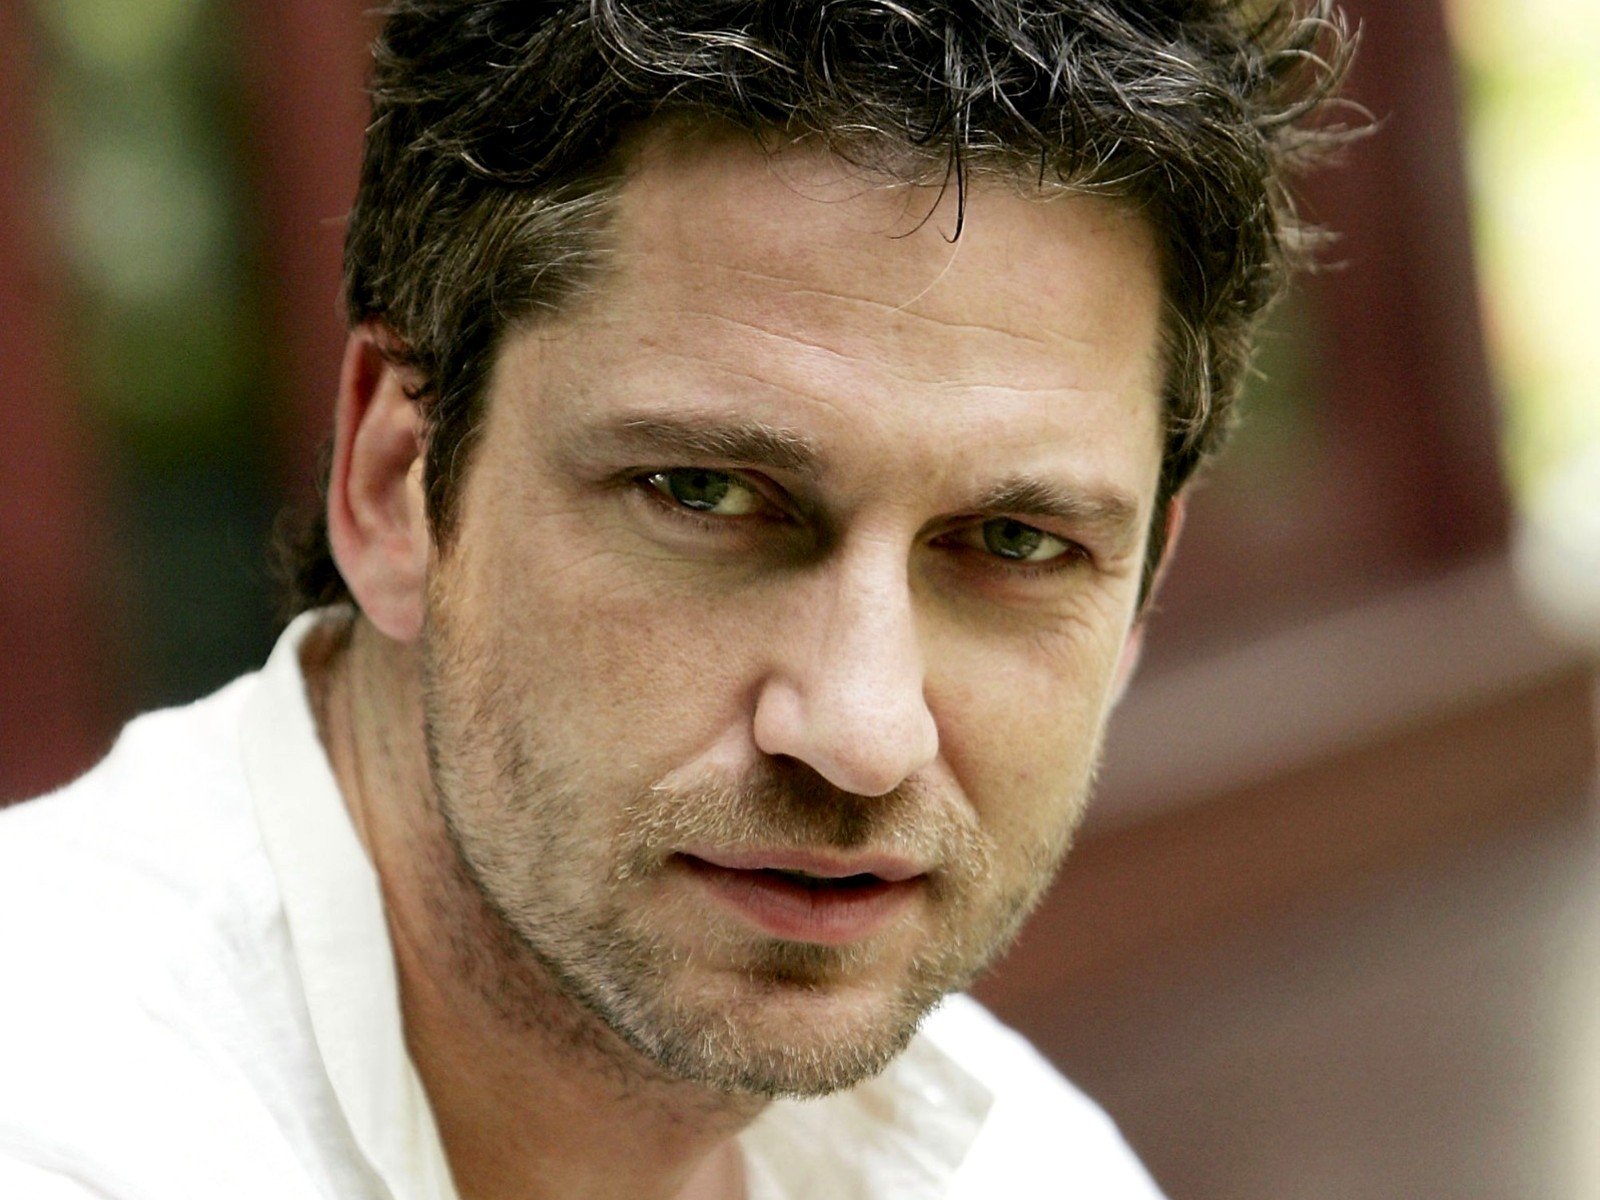 gerard butler, celebrity, the look!!! Free Stock Photo